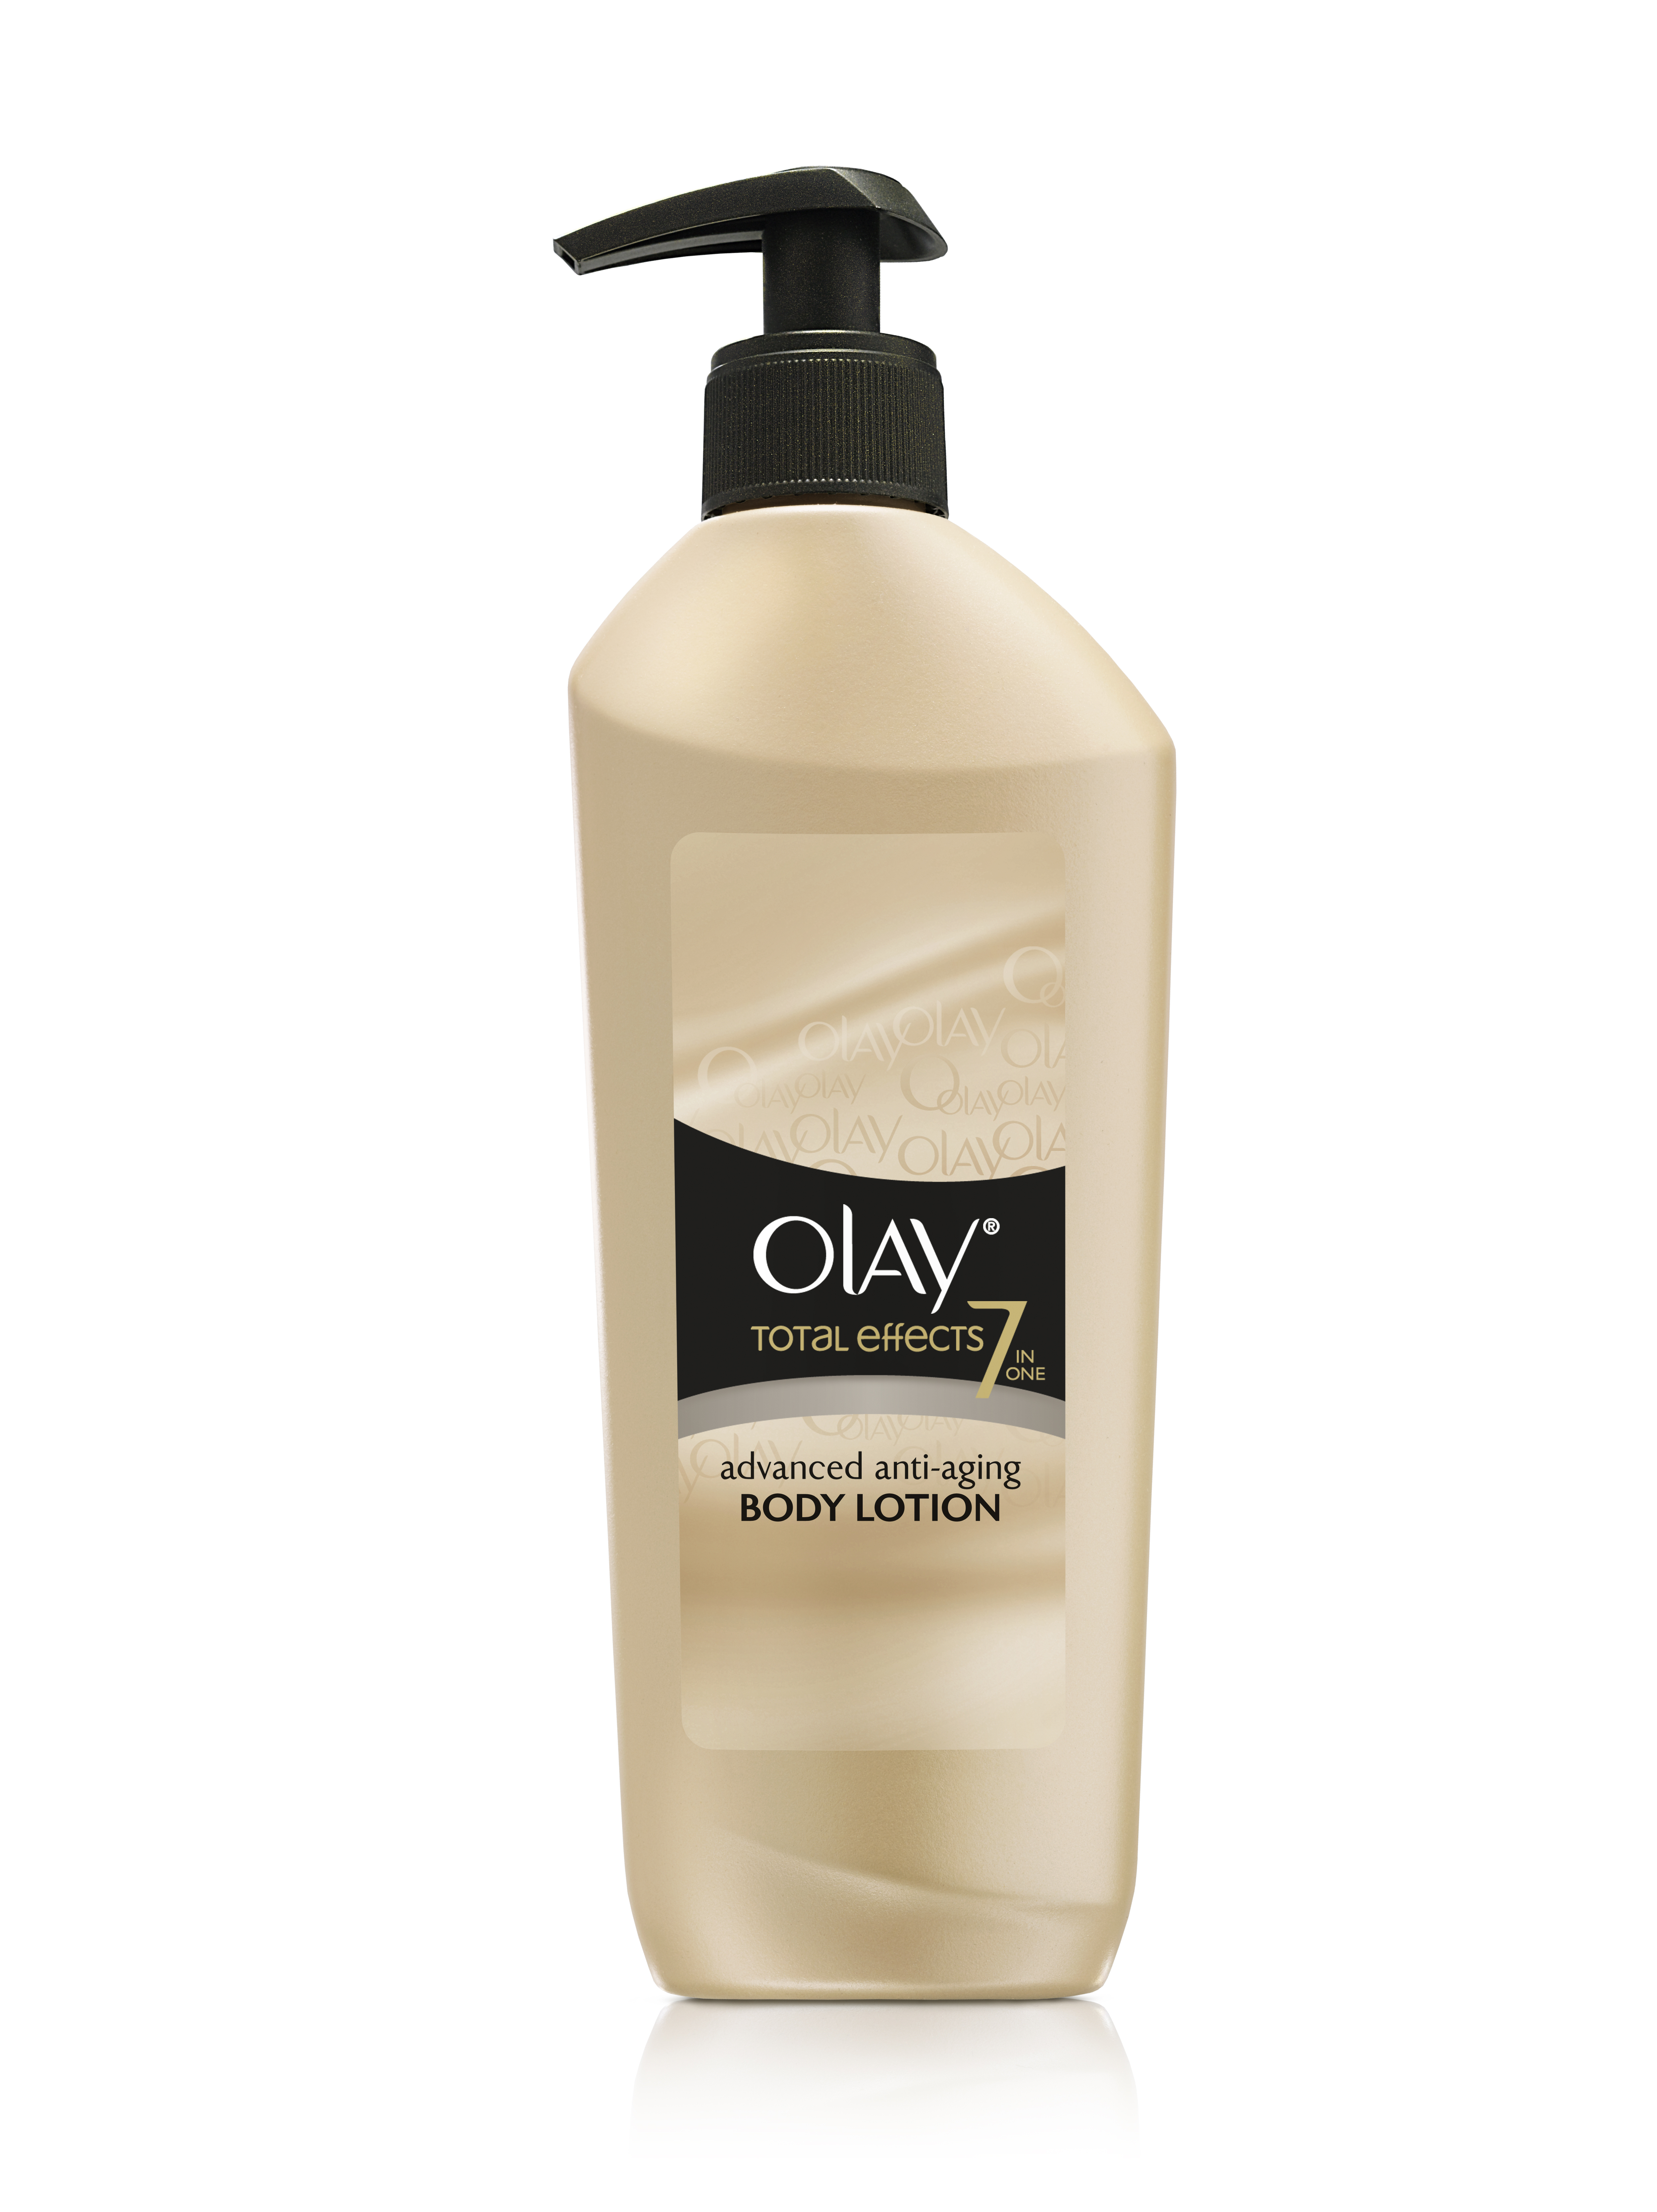 Olay Total Effects Body Lotion